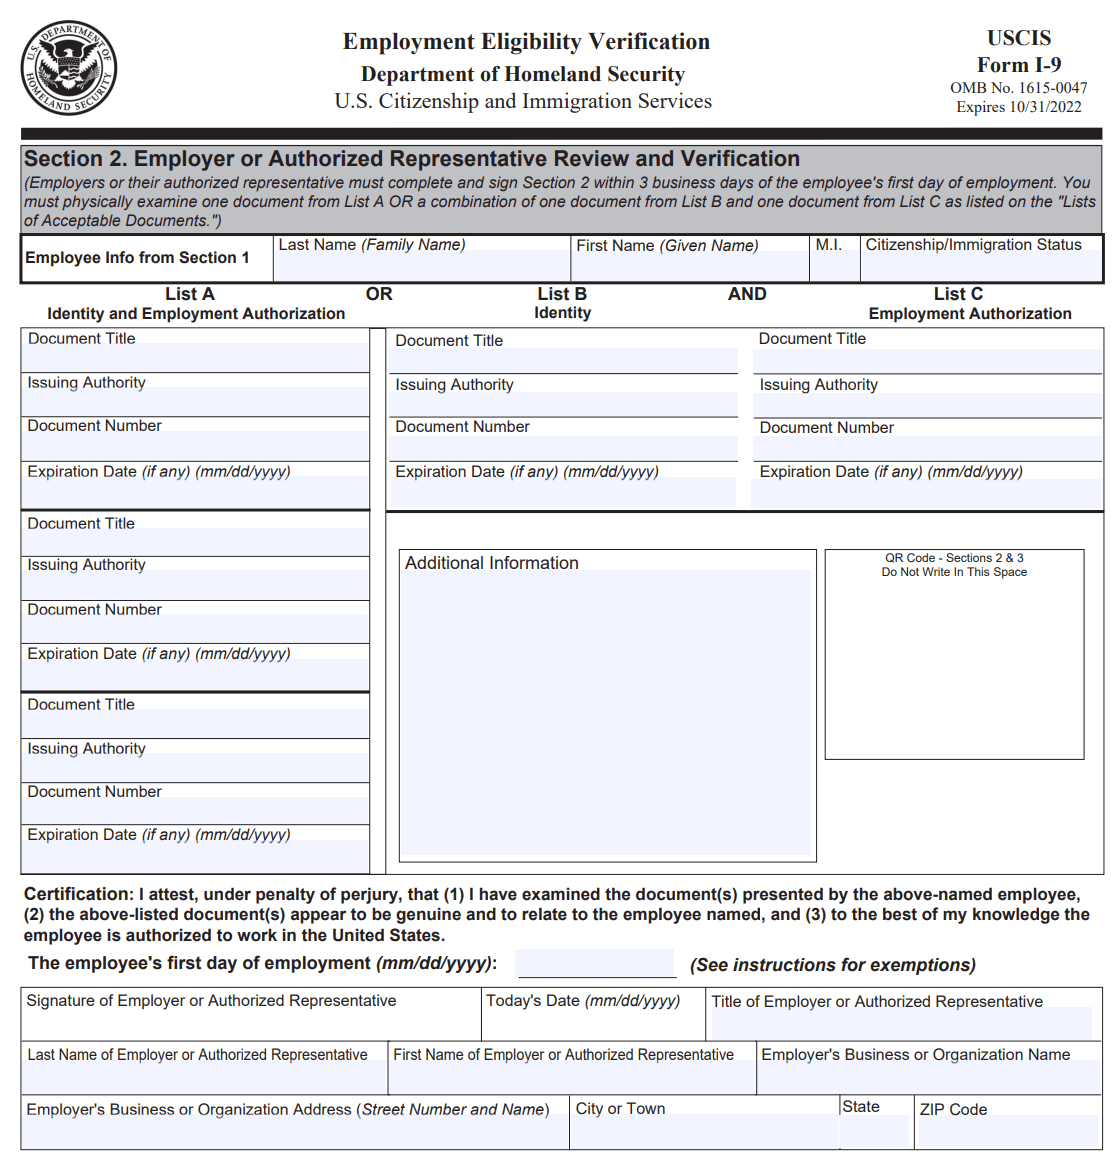 i-9-tax-form-section-2.png